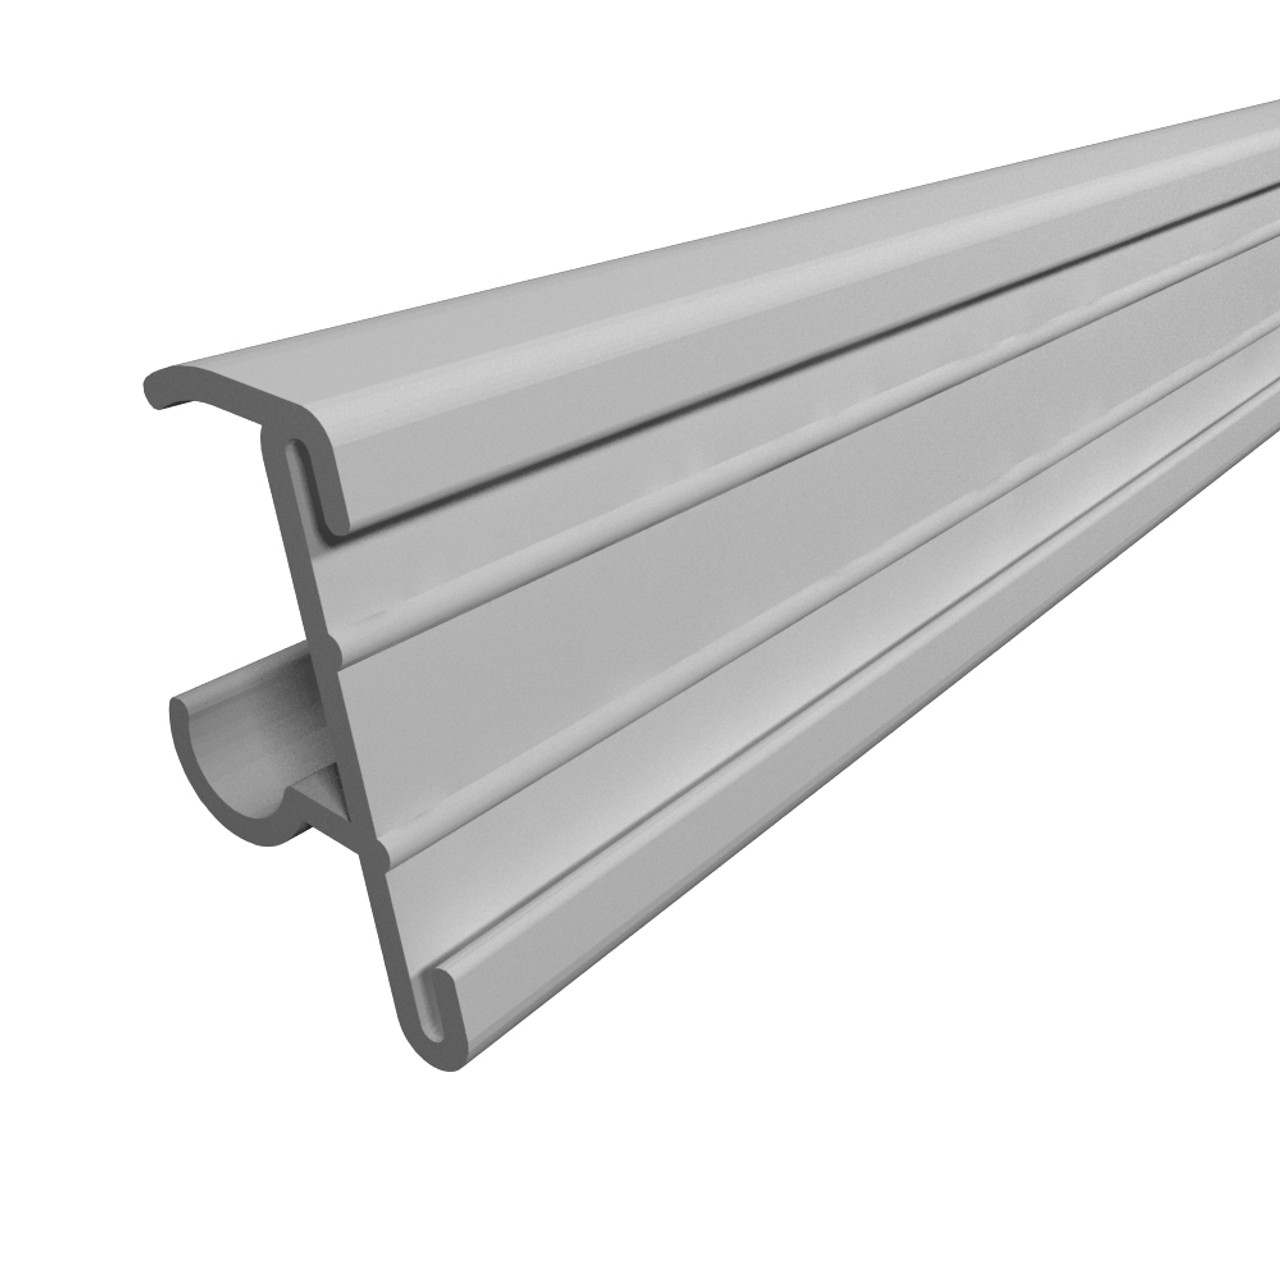 Heavy Duty Price Tag Molding For Cooler Shelves